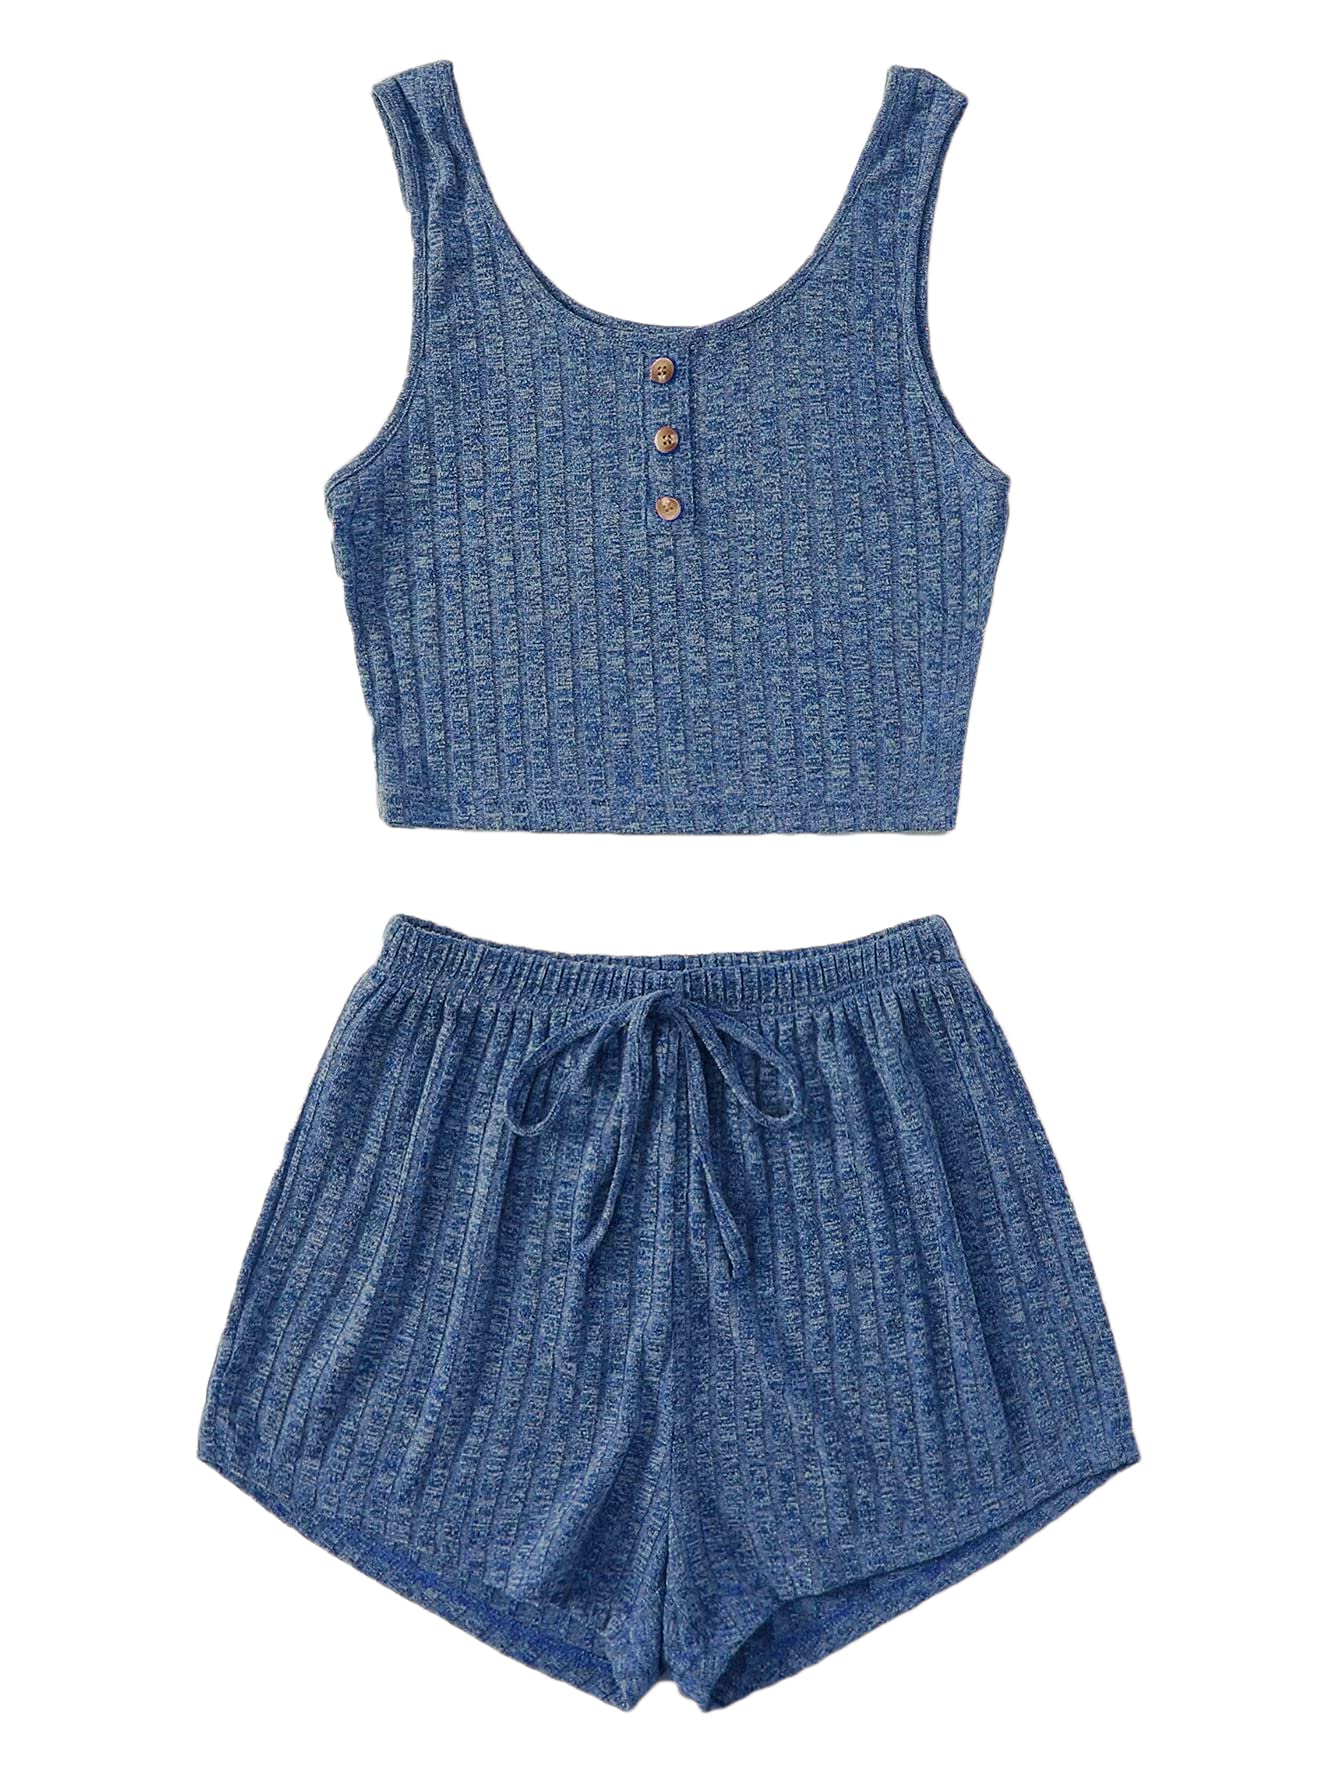 SheIn Womens 2 Piece Sleeveless Button crop Tank Tops and Shorts Lounge Set Navy Blue X-Large